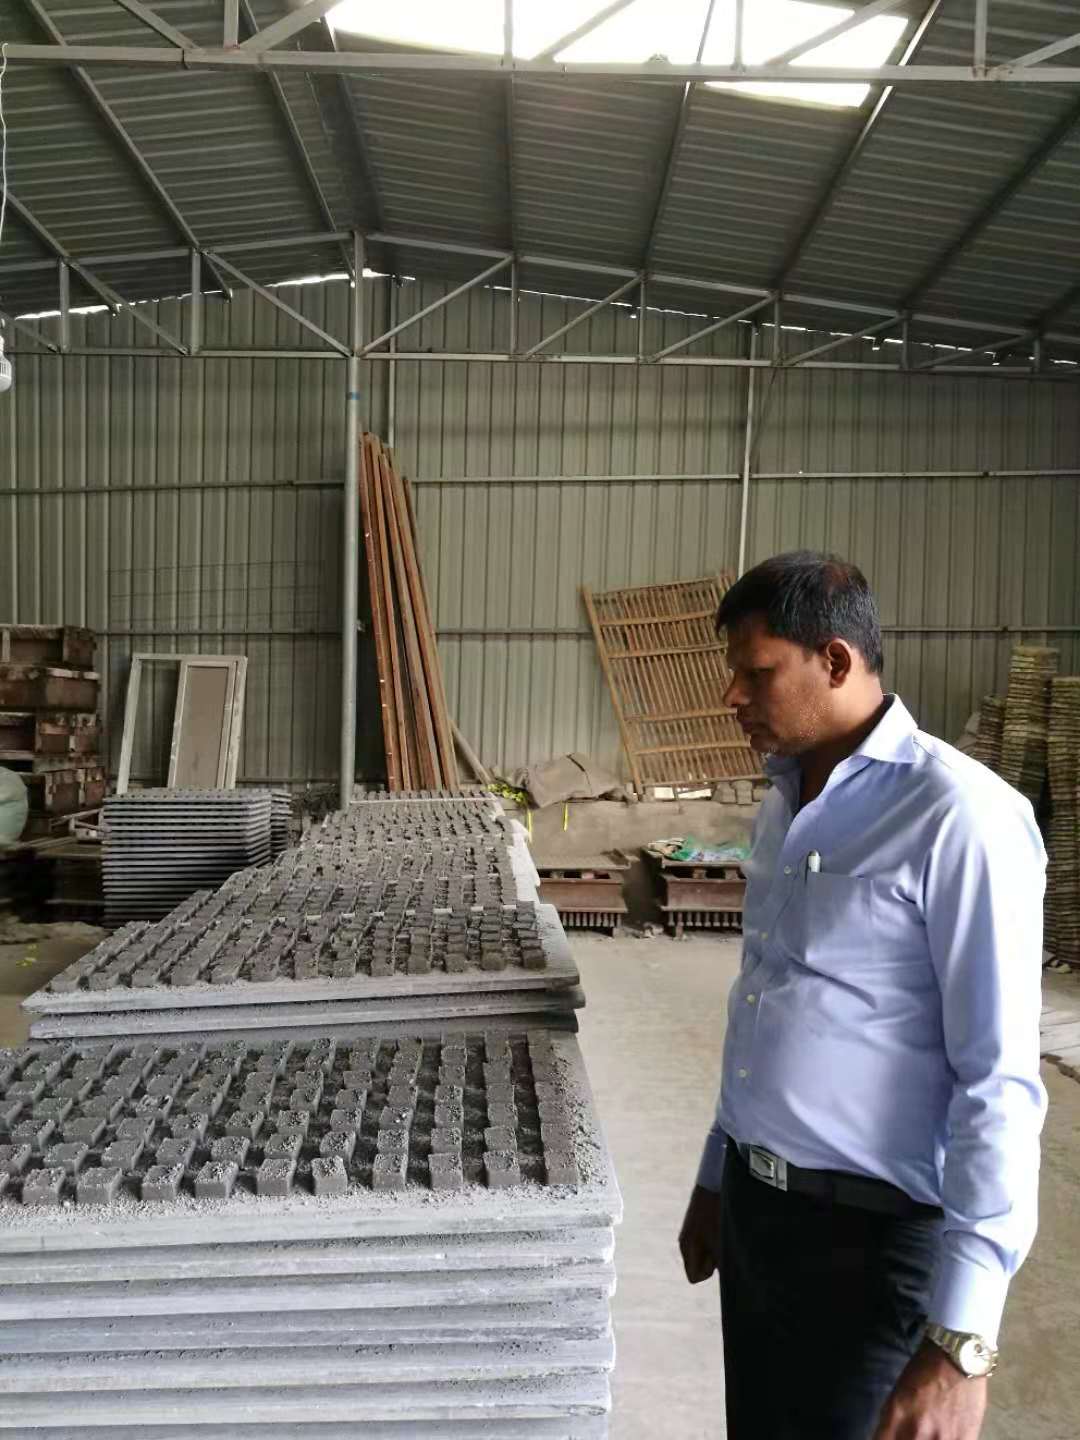 Efficient Brick Making Process in Bangladesh | Machine and Hand Techniques at Our Factory | No Exploitation or Child Labor Involved